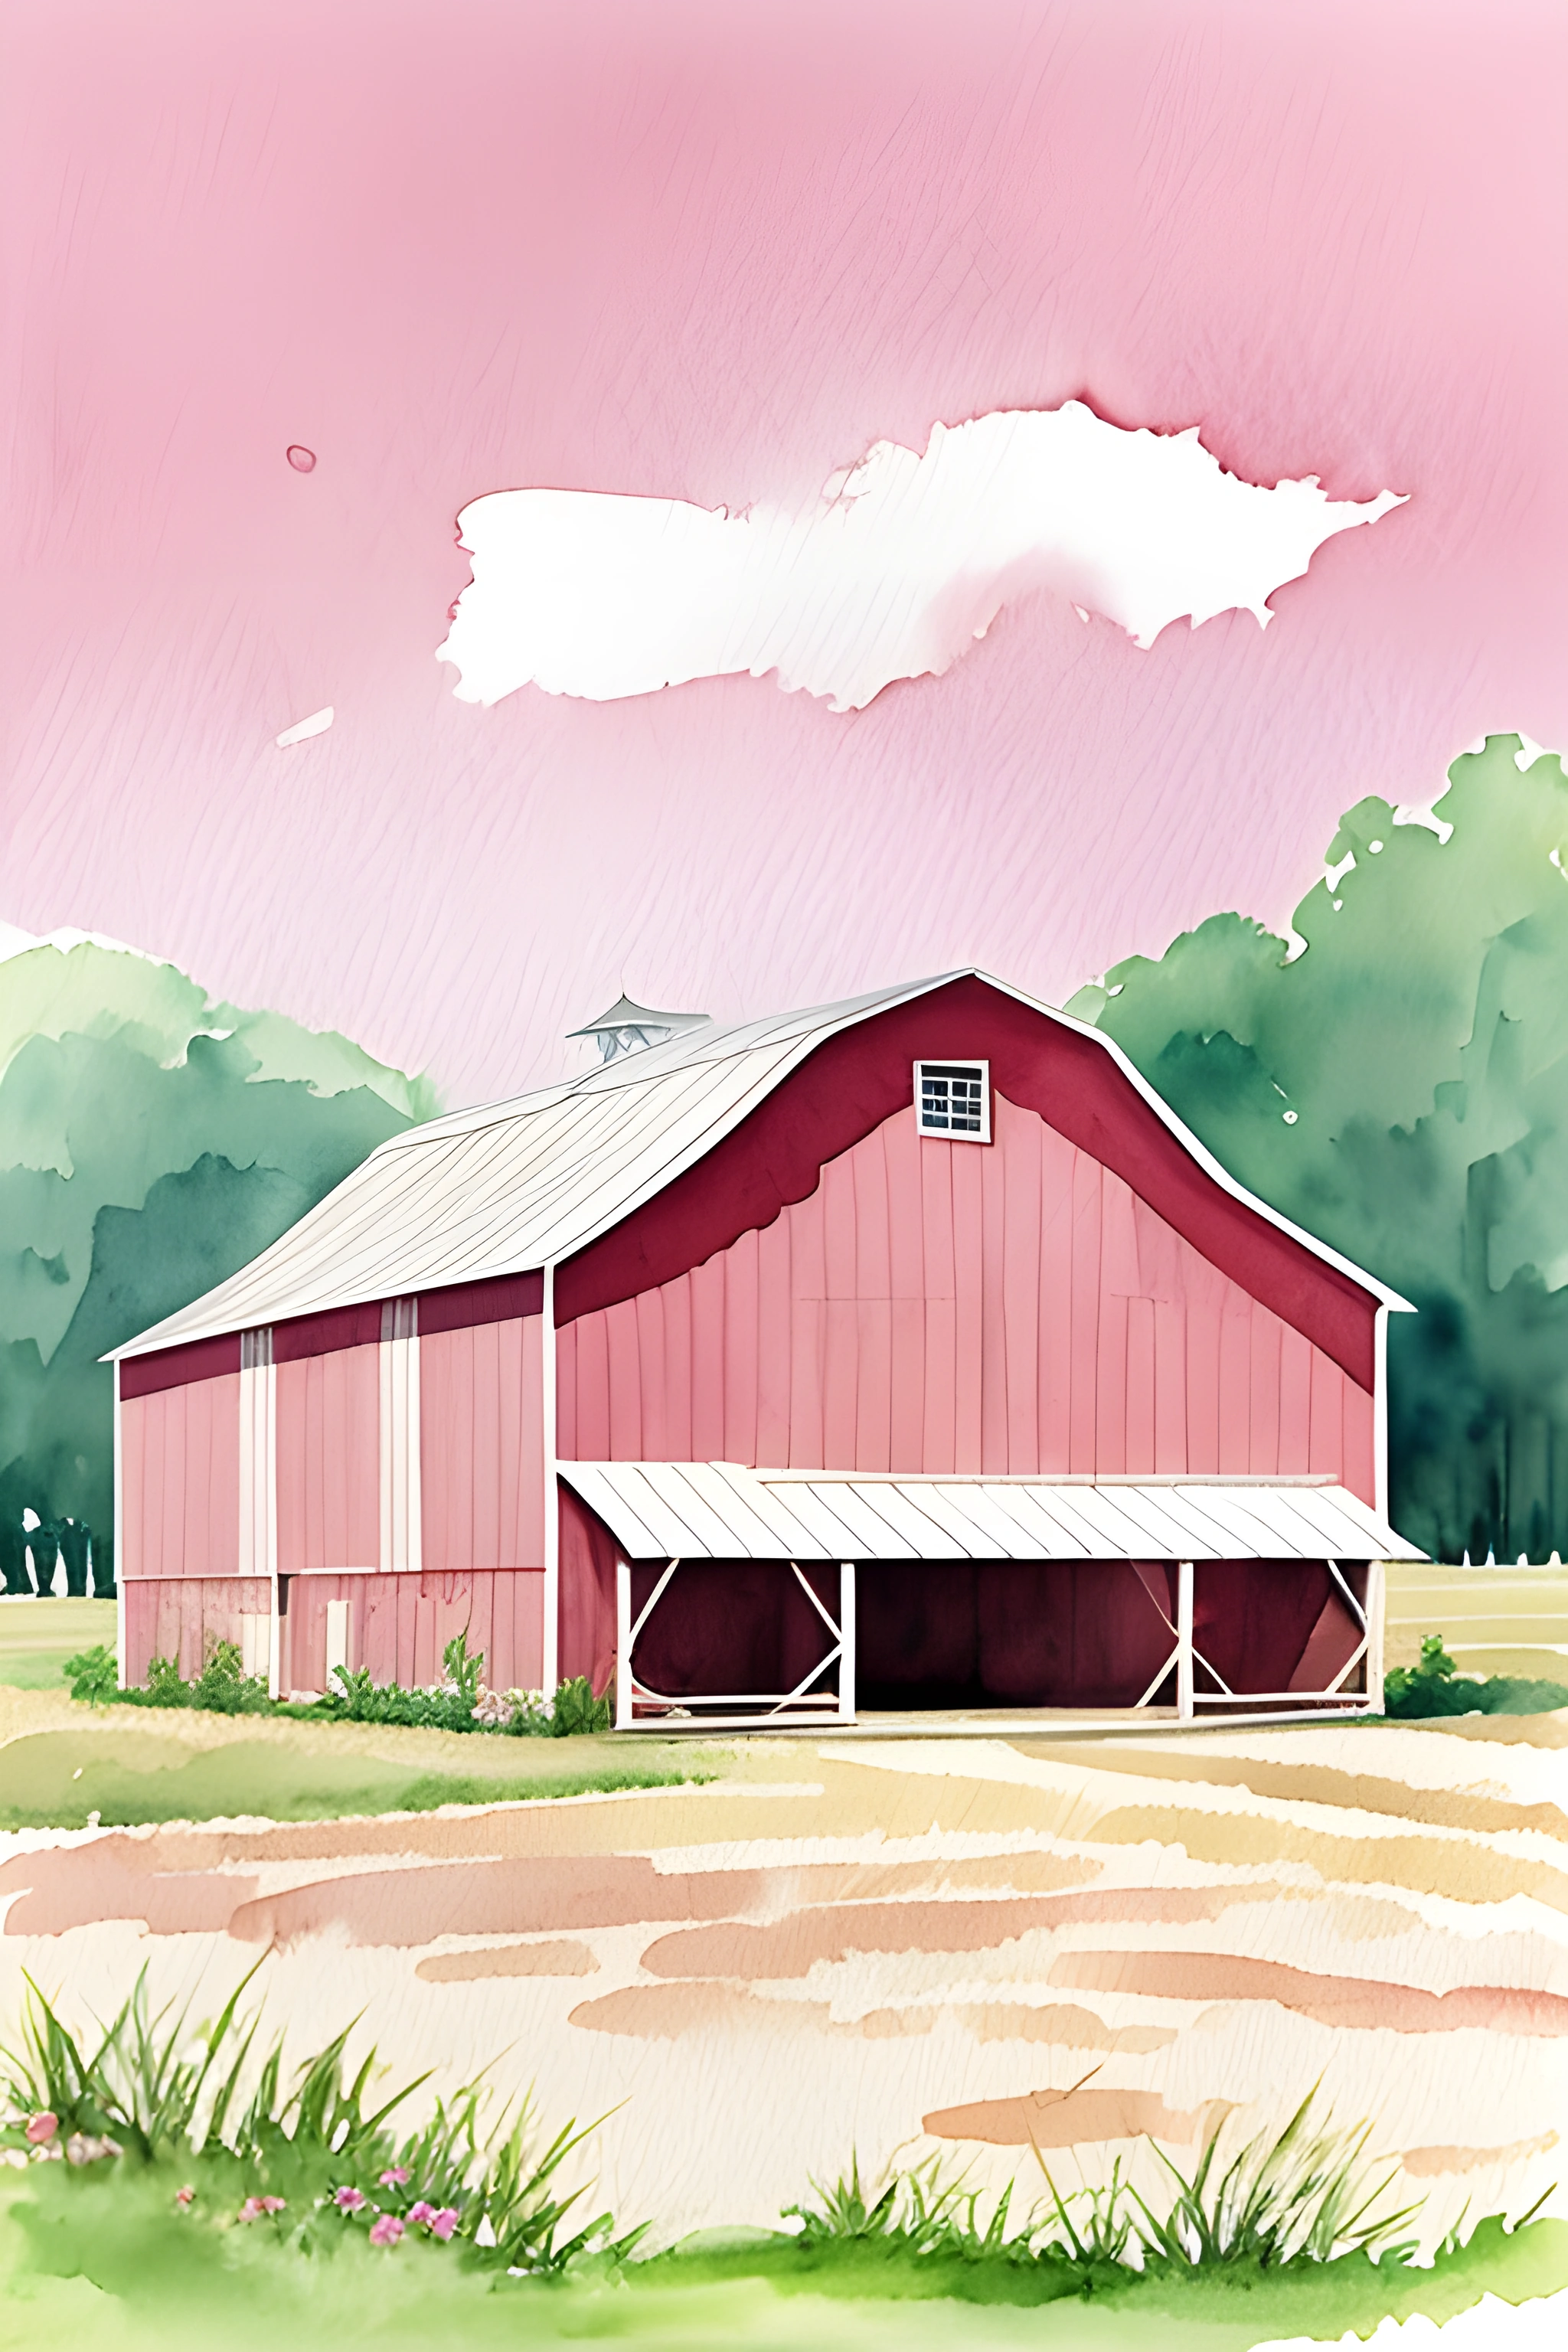 a painting of a red barn in a field